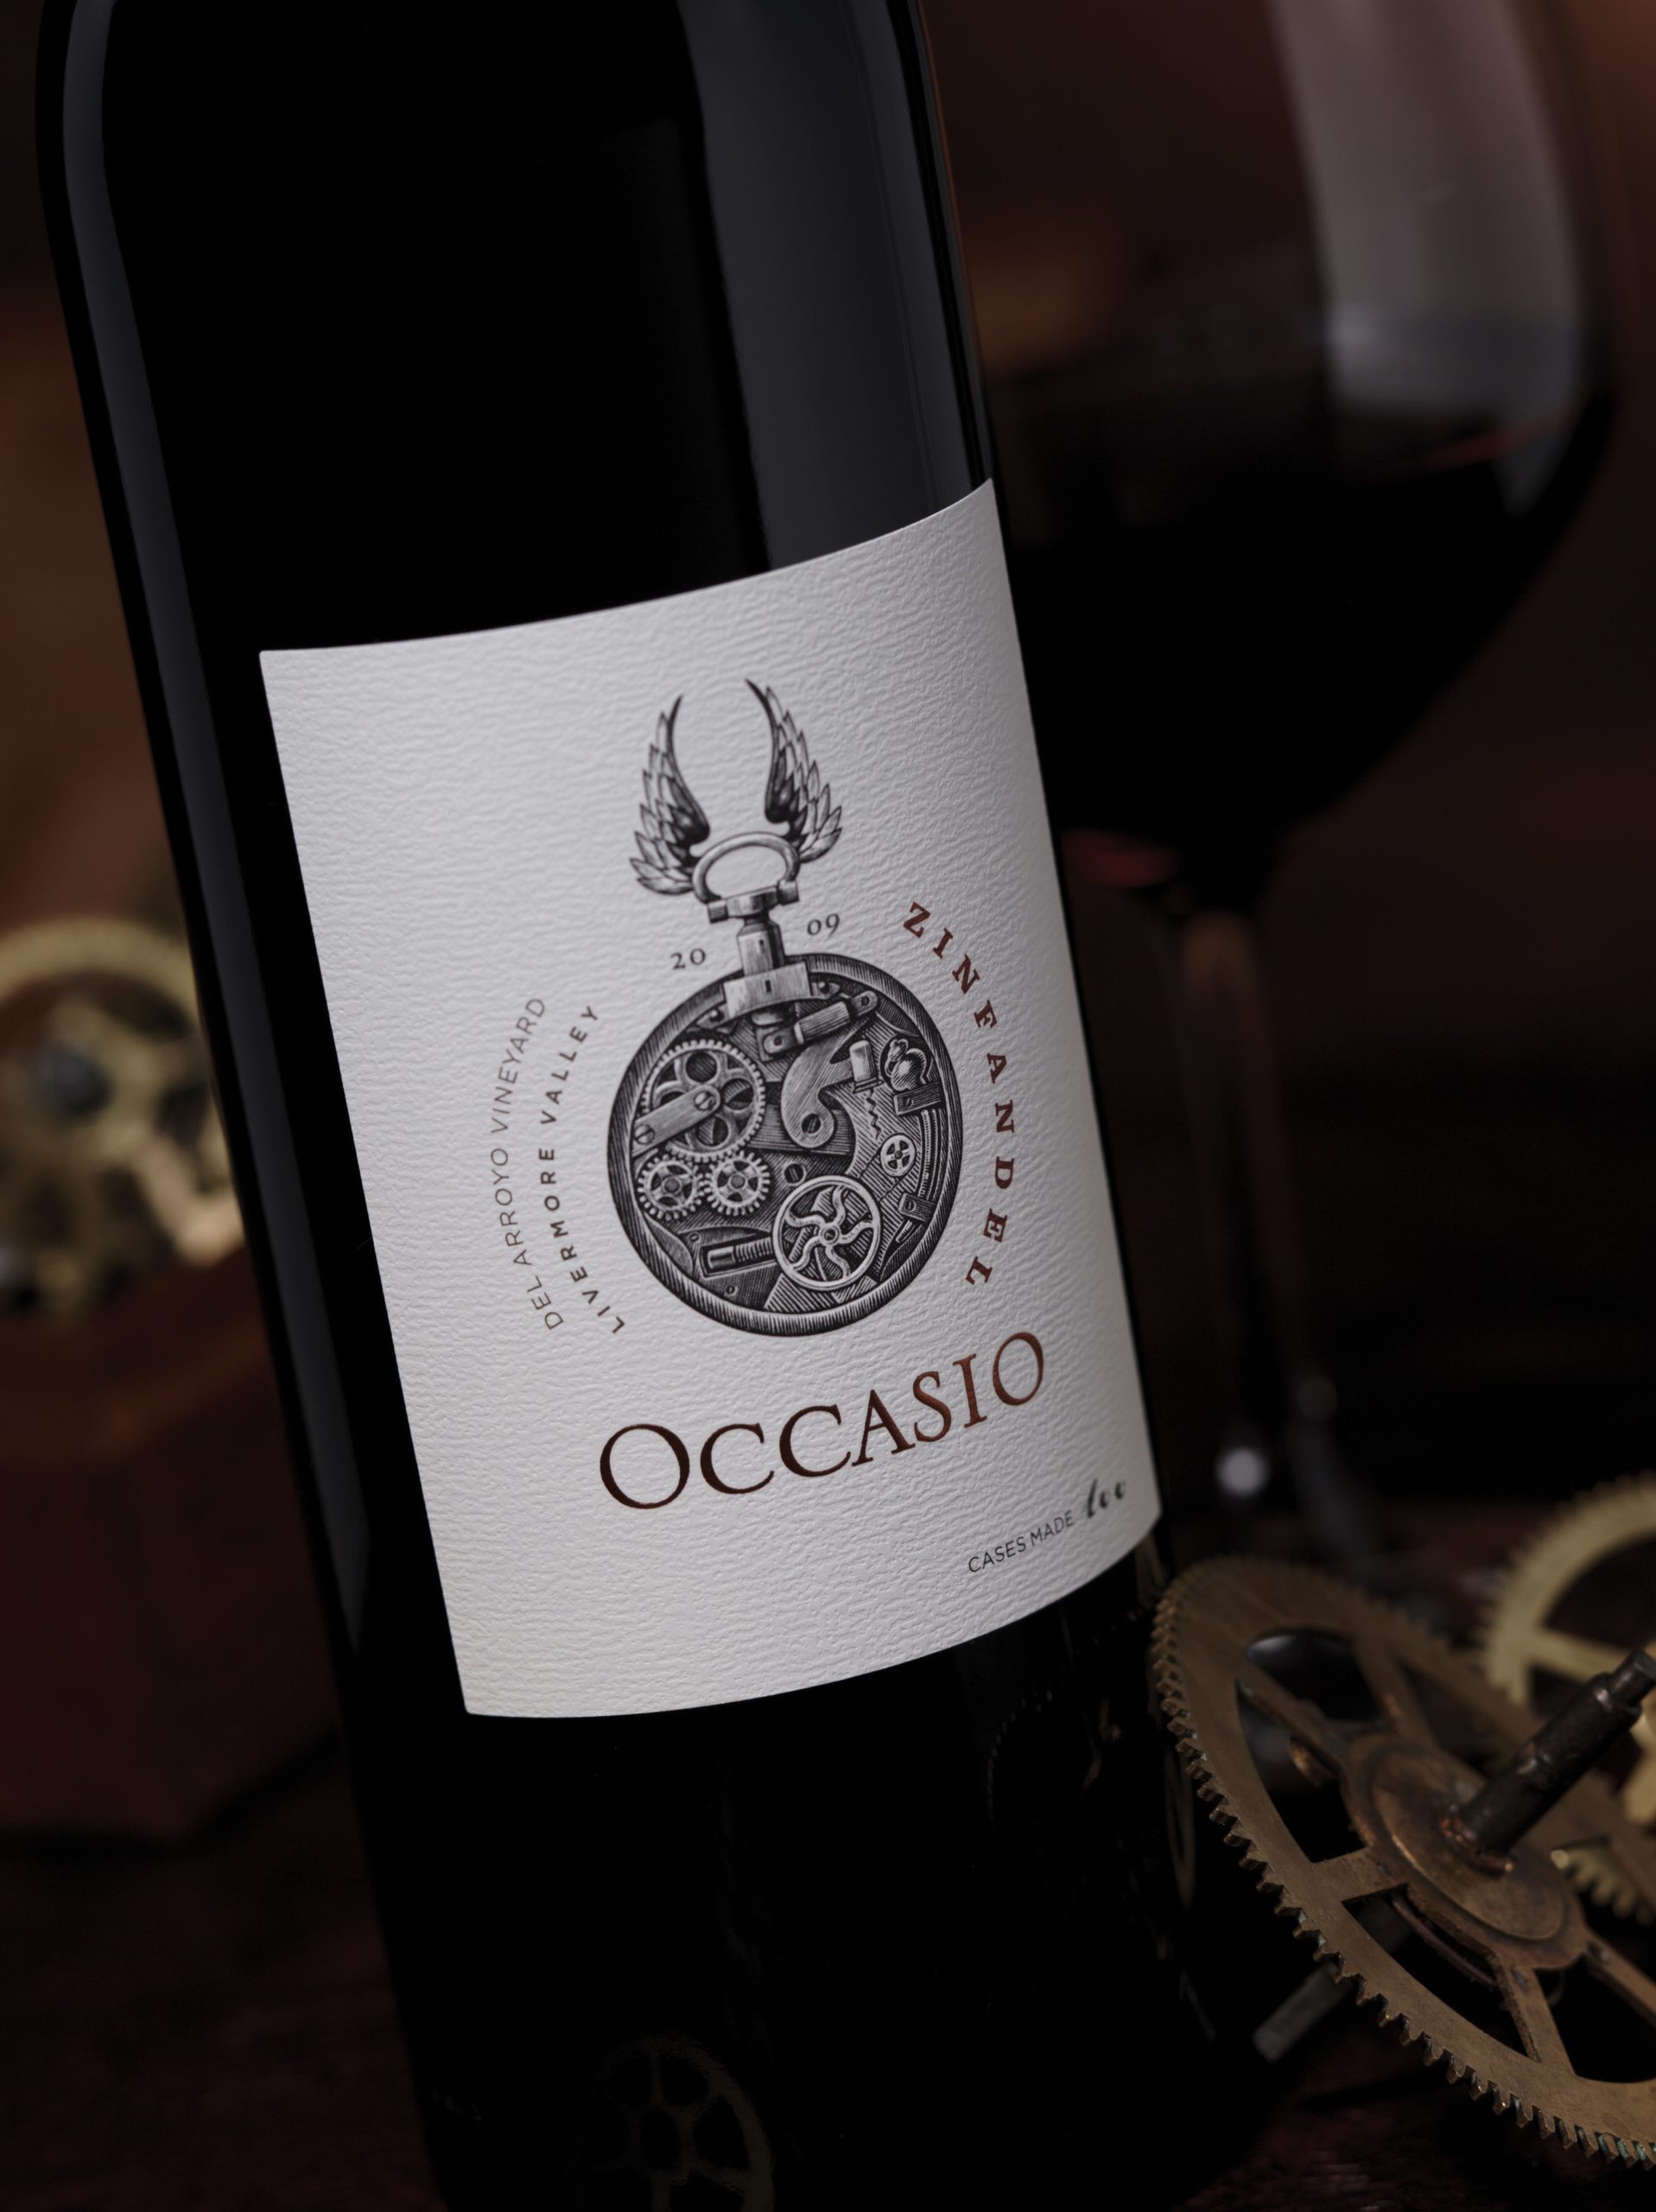 occasio winery founder's collection 2009 zinfandel